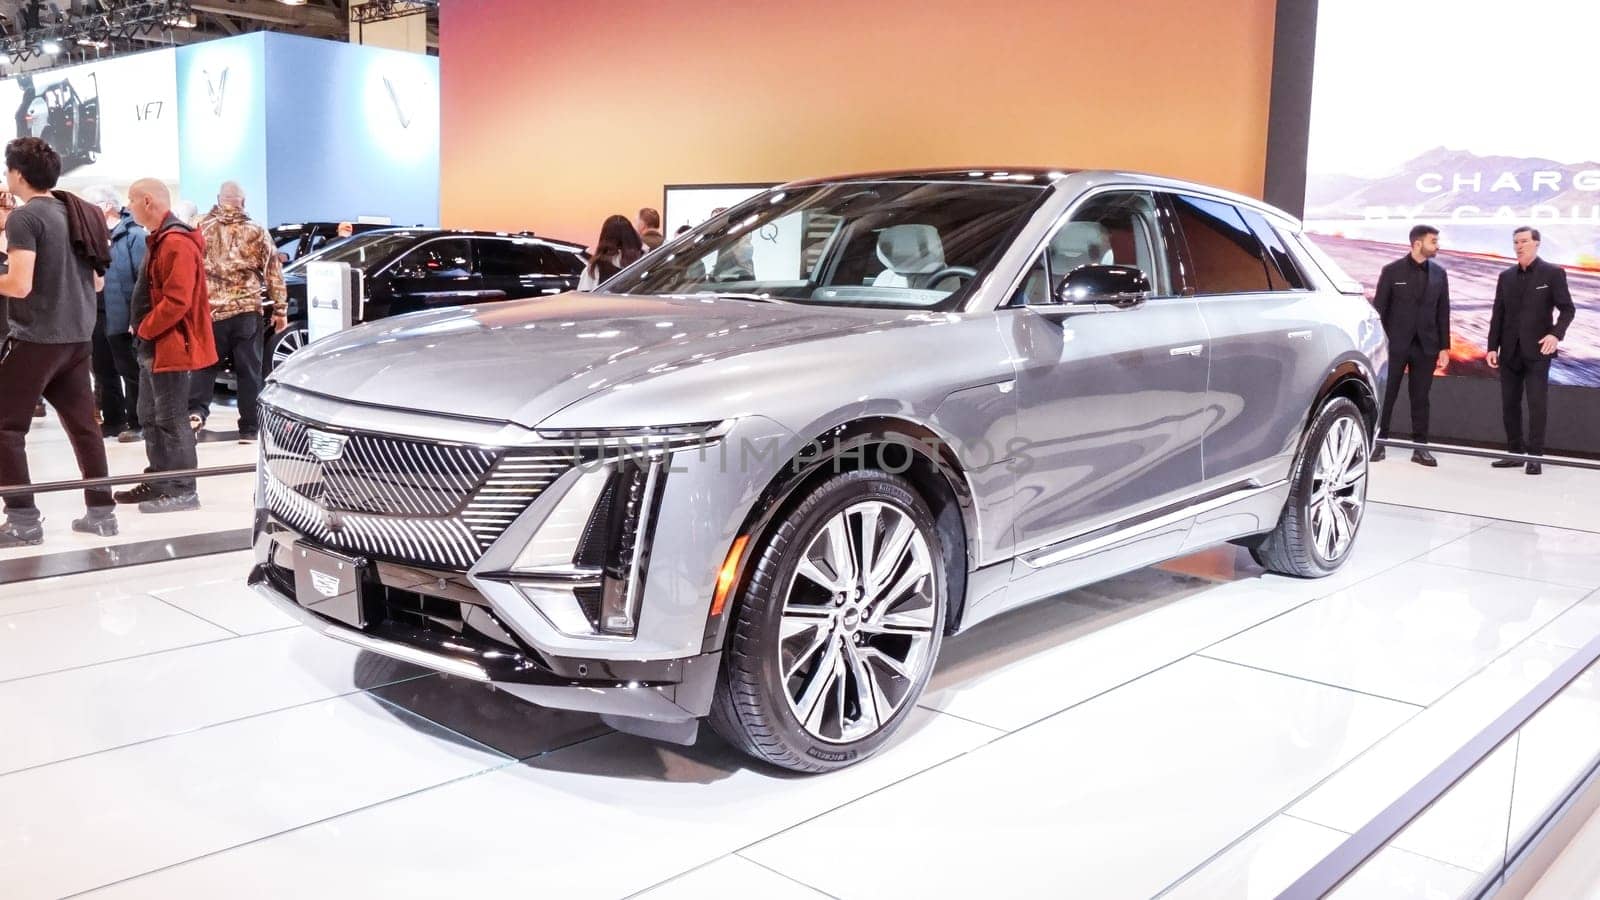 Crowds looking at new car models at Auto show. Cadillac car on display. National Canadian Auto Show with many car brands. Toronto ON Canada Feb 19, 2023